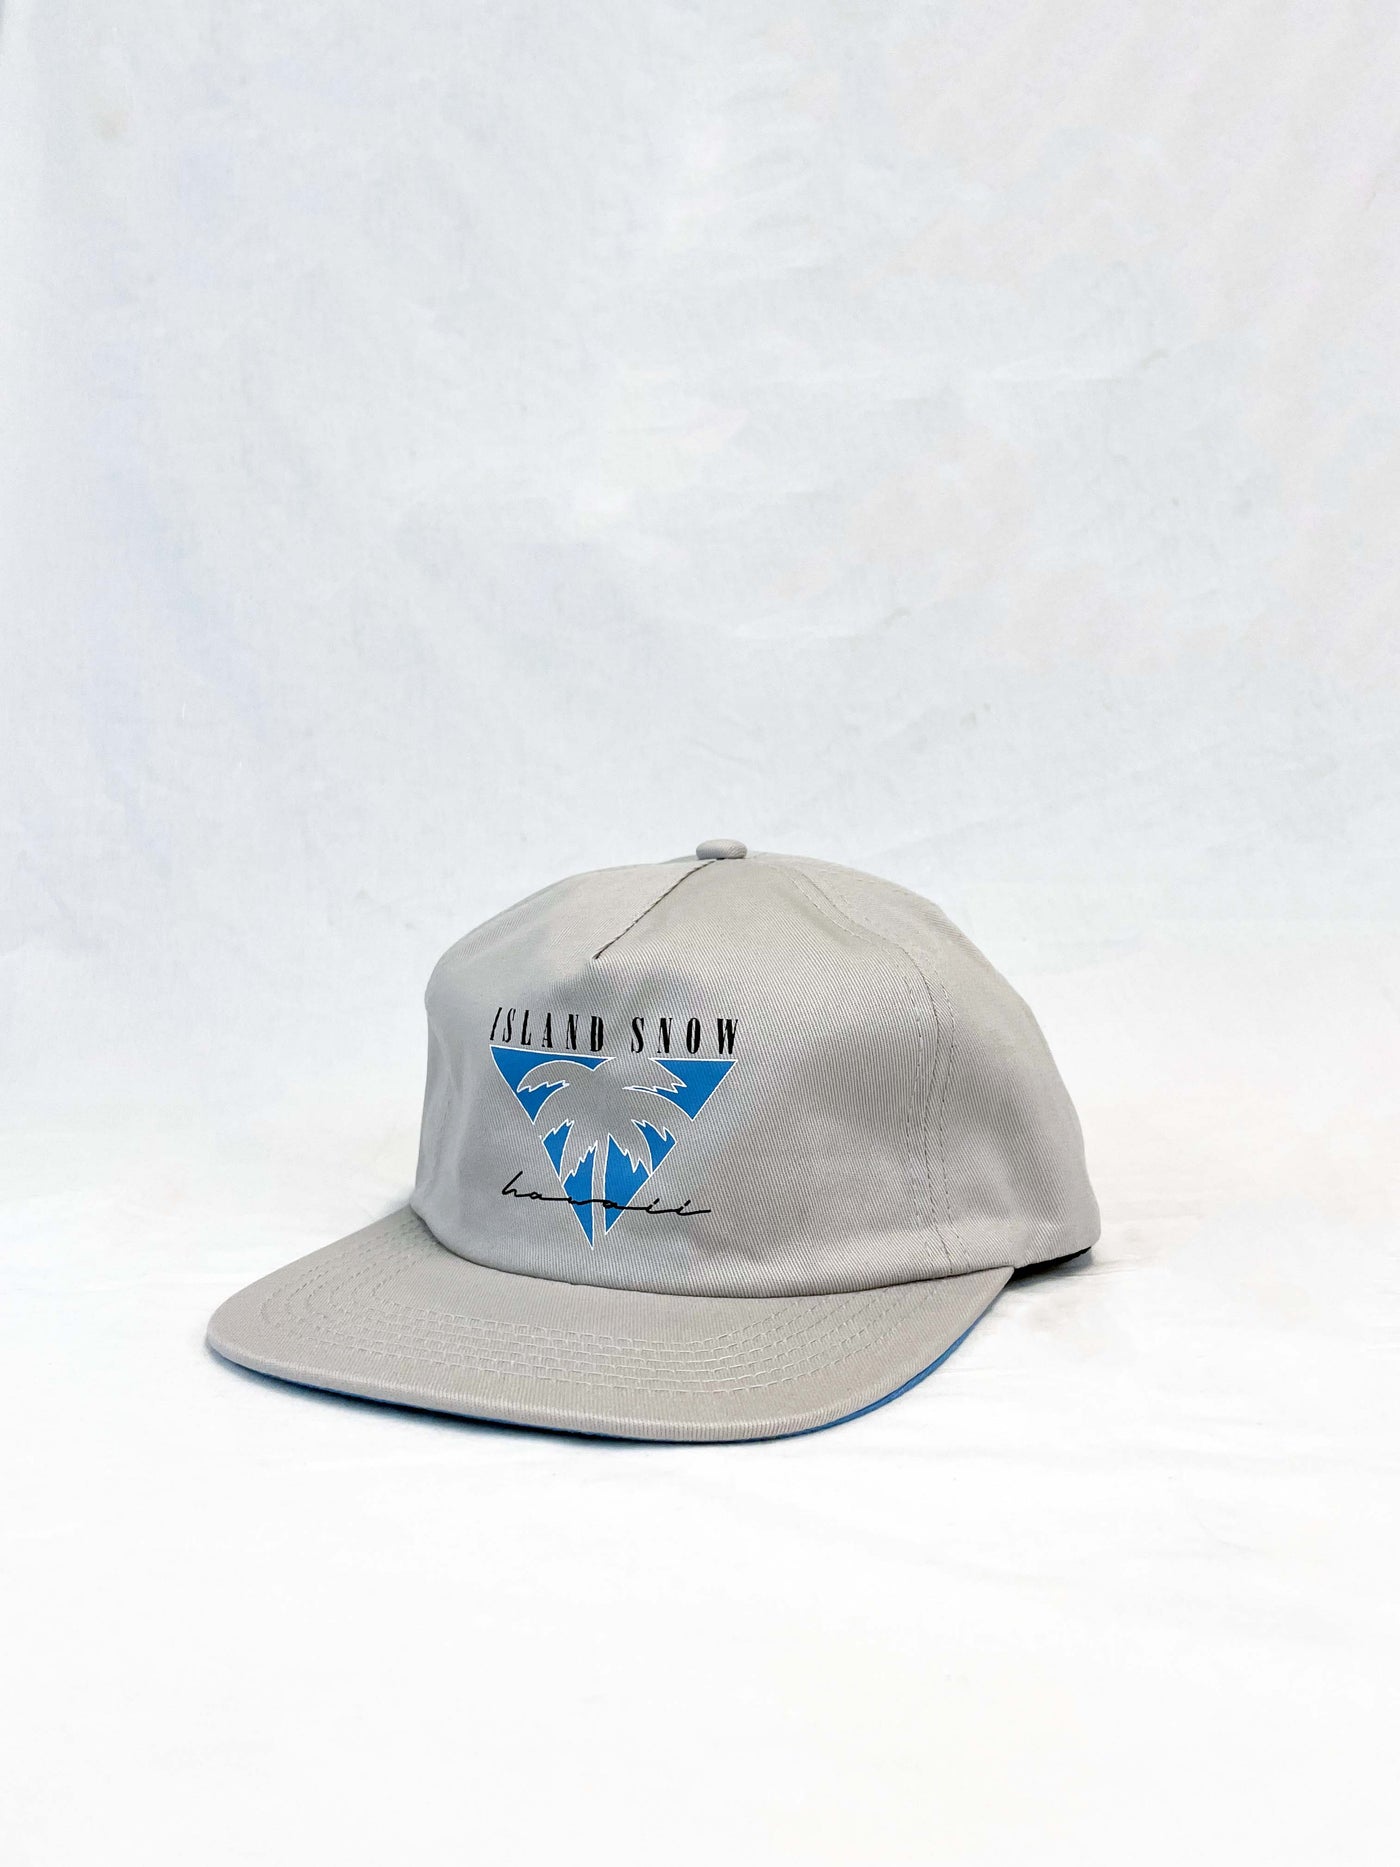 Island Snow Hawaii Unstructured Snapback Hat - IS Retro Palm